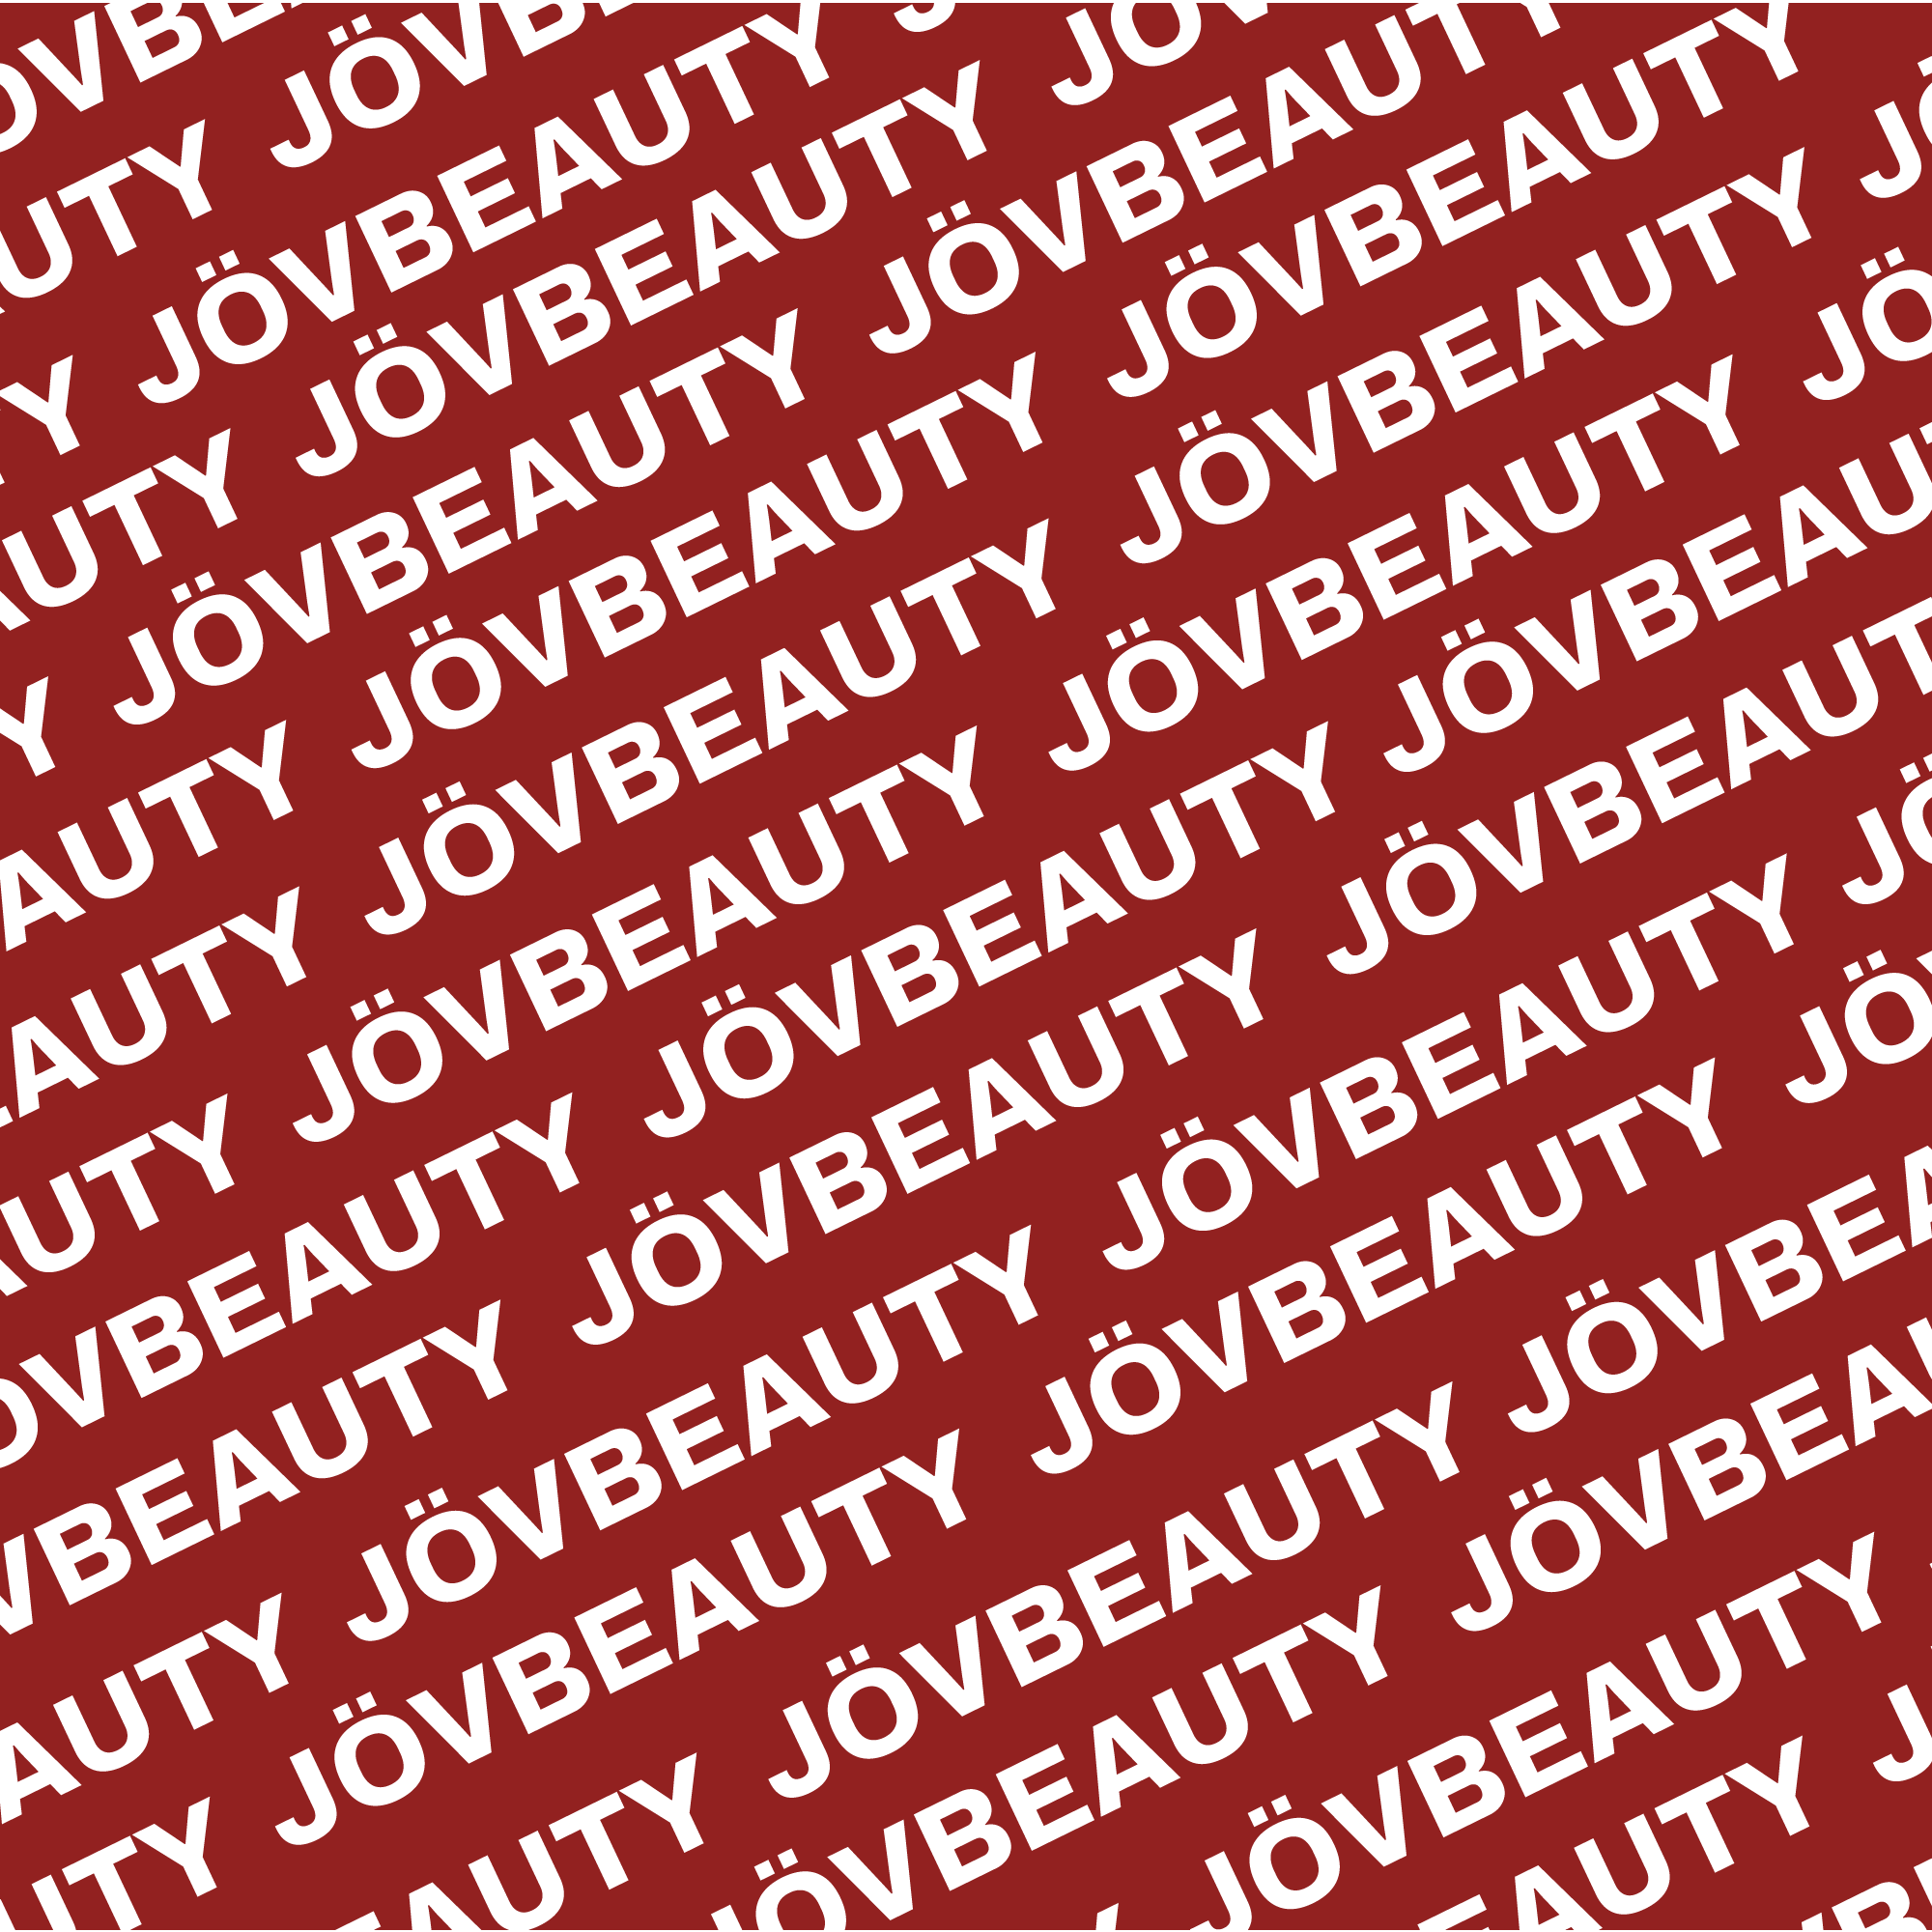 "All in One" JÖV BEAUTY Pack